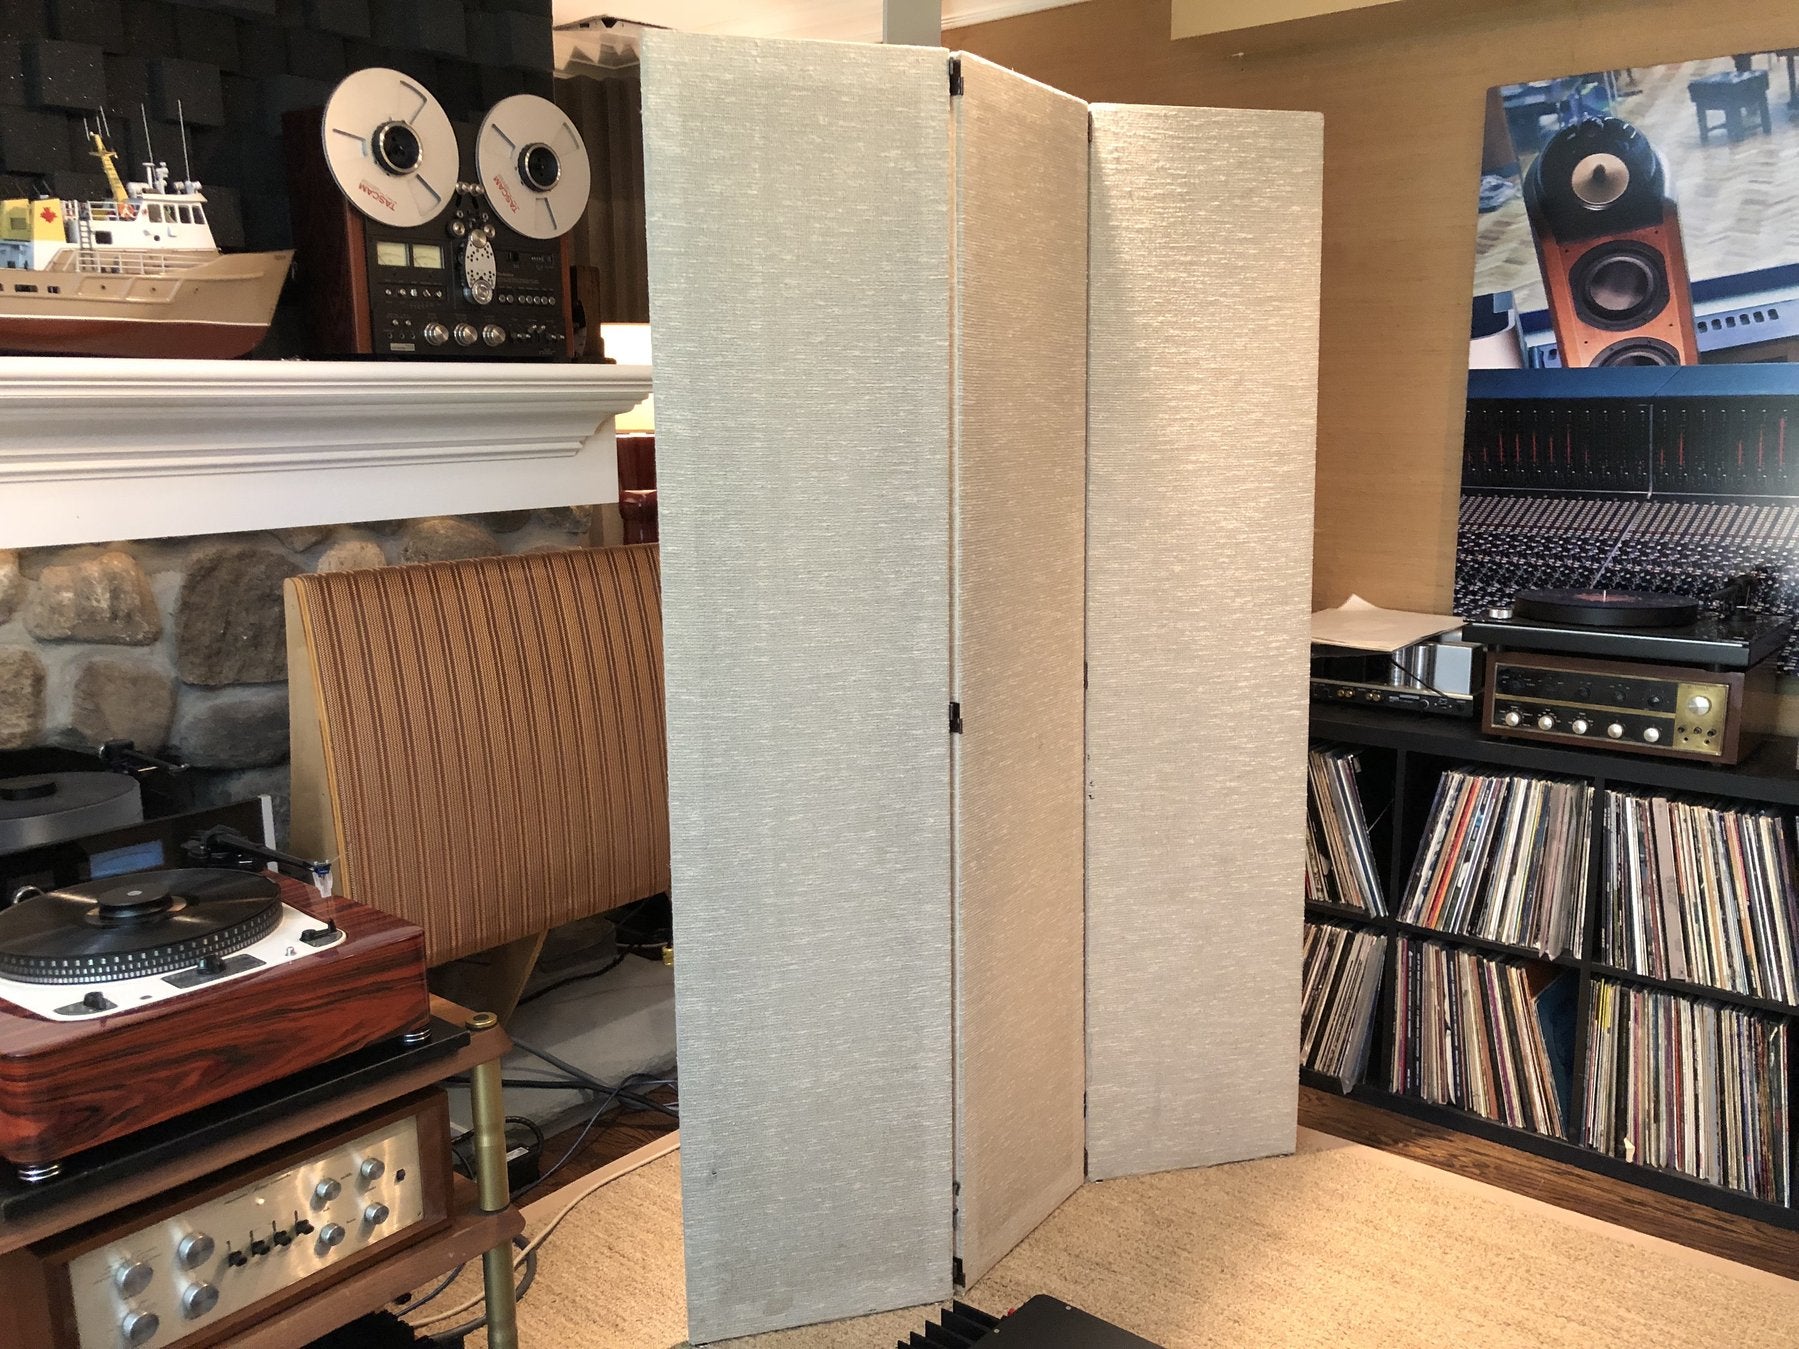 The Audiophiliac "Blissed out with a Magnepan, Marantz, Bryston, and Garrard system"